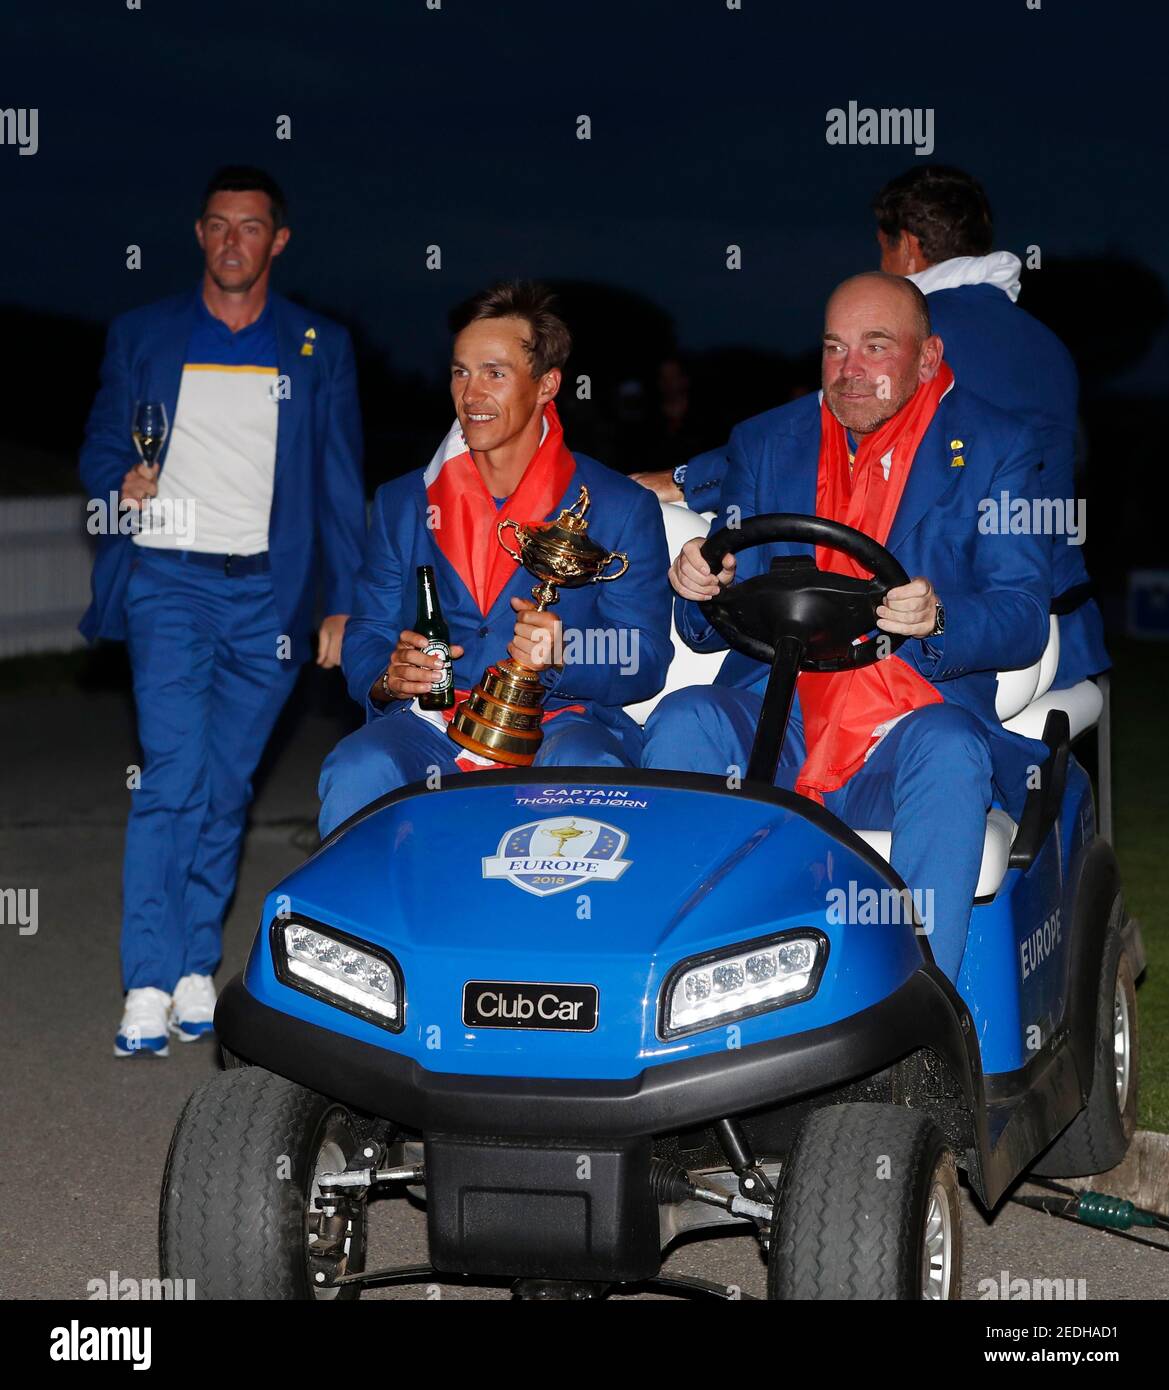 Golf - 2018 Ryder Cup at Le Golf National - Guyancourt, France - September  30, 2018. Team Europe's Thorbjorn Olesen and captain Thomas Bjorn celebrate  with the trophy on a golf buggy